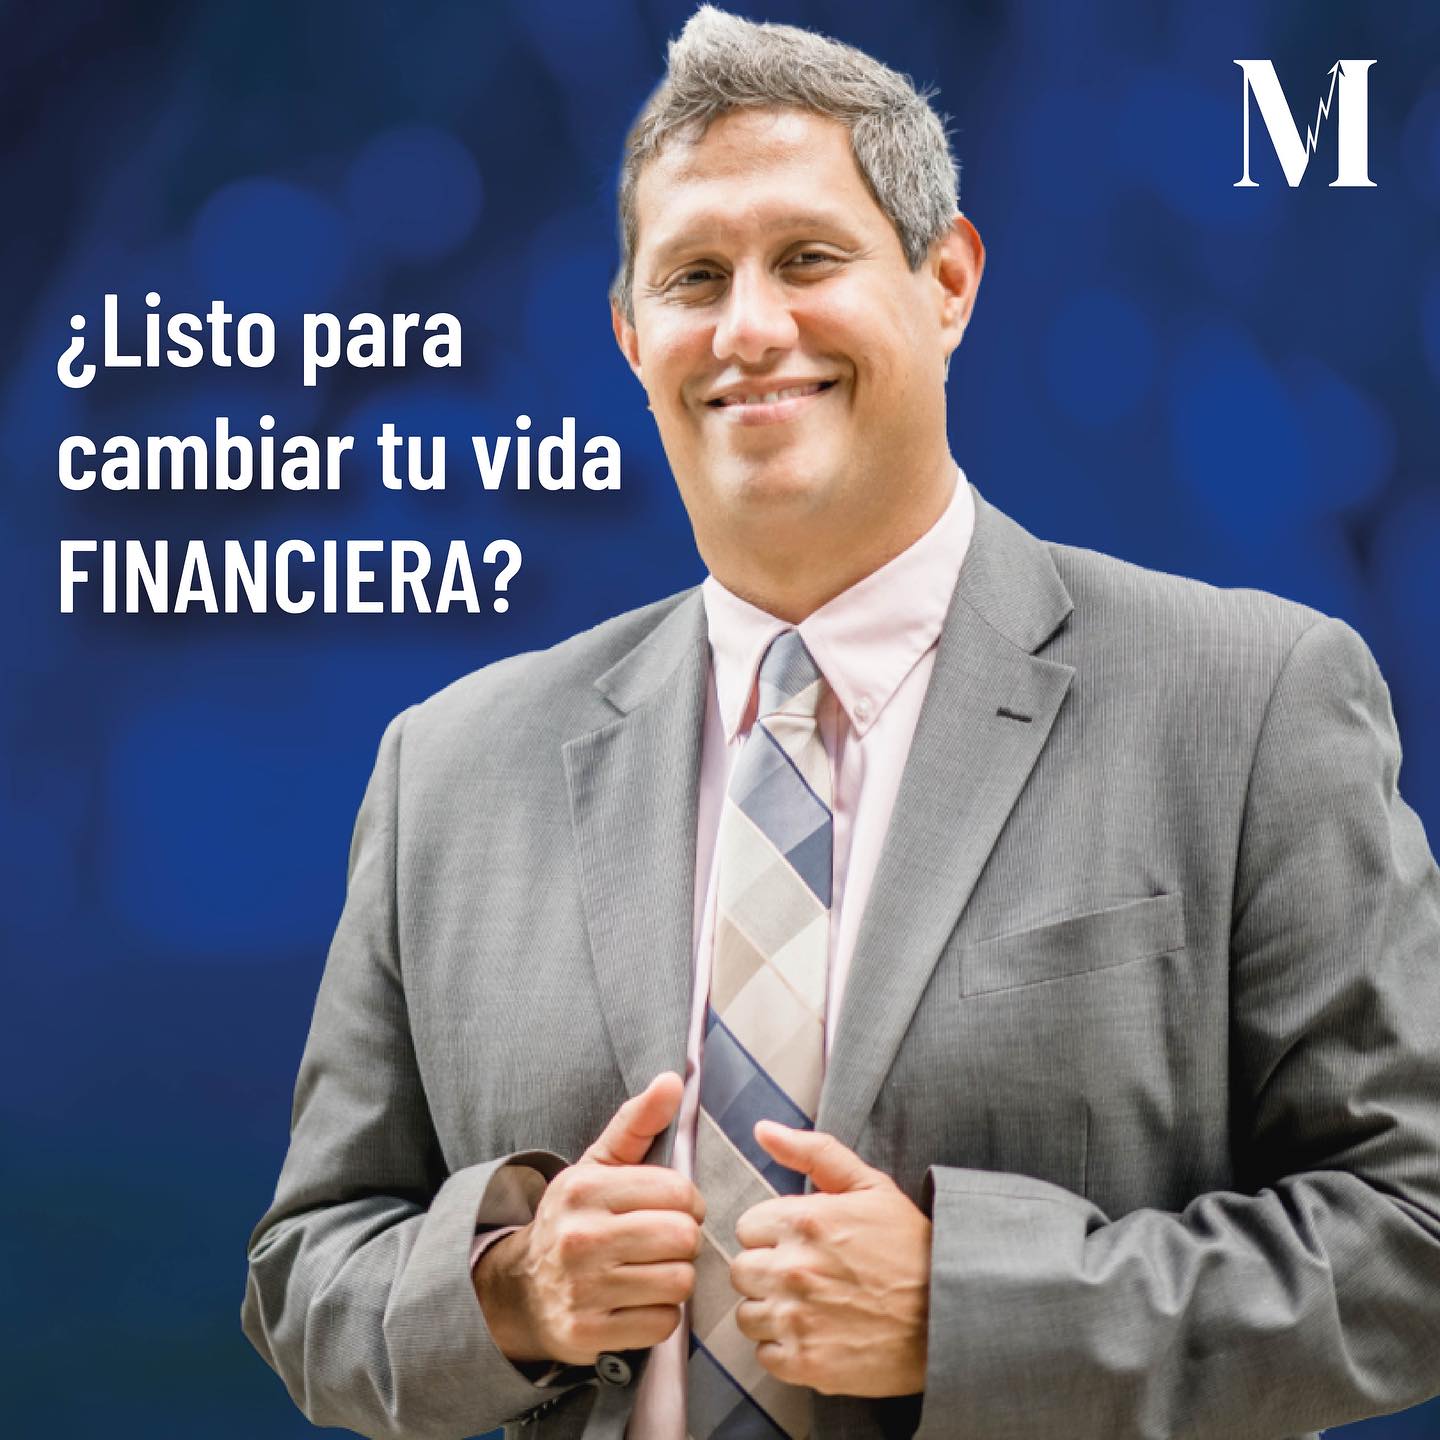 Hernan Porras Molina: From Graduate to Leader in Record Time at Primerica